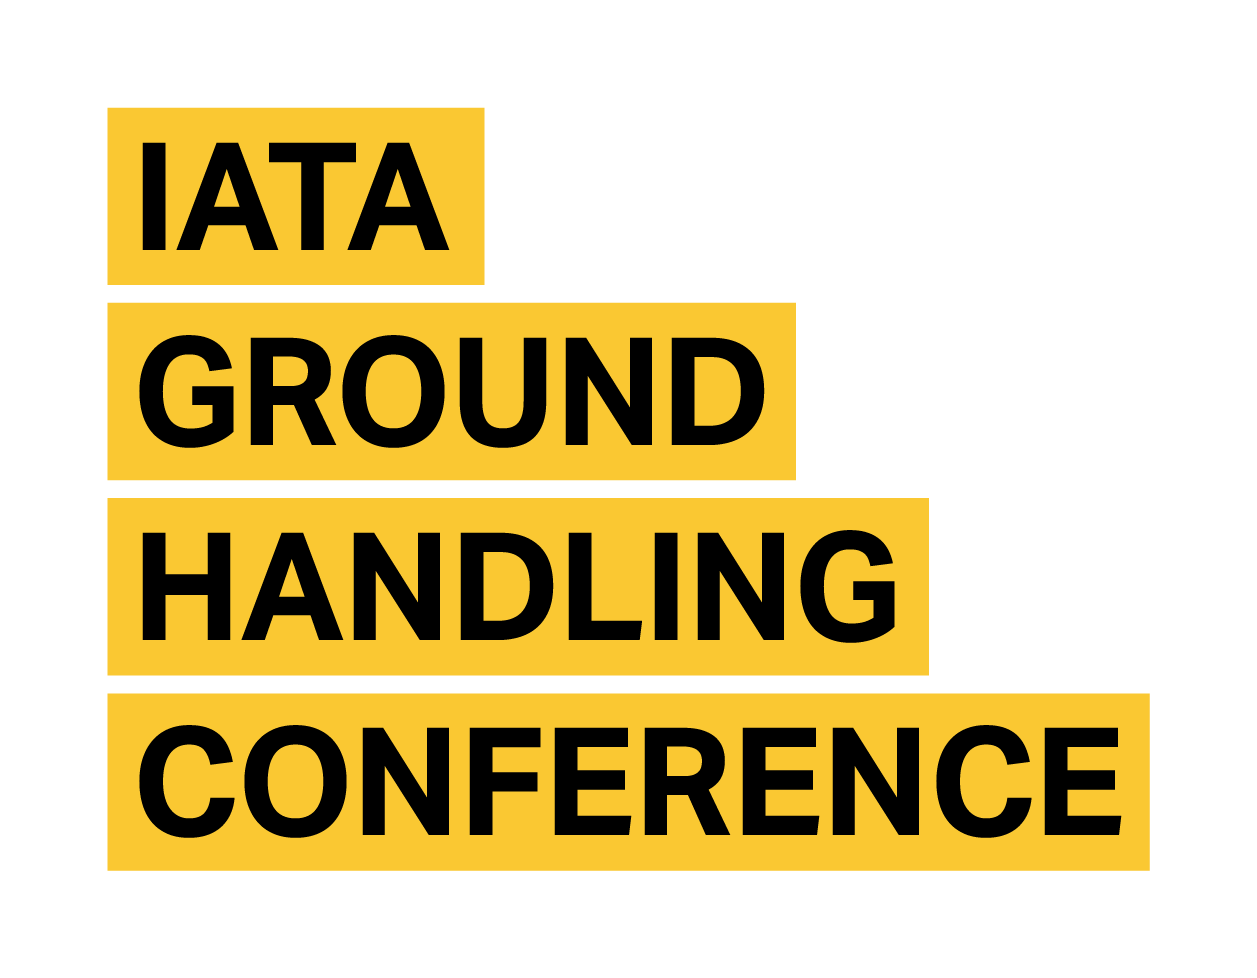 The 35th IATA Ground Handling Conference - Embracing Technology